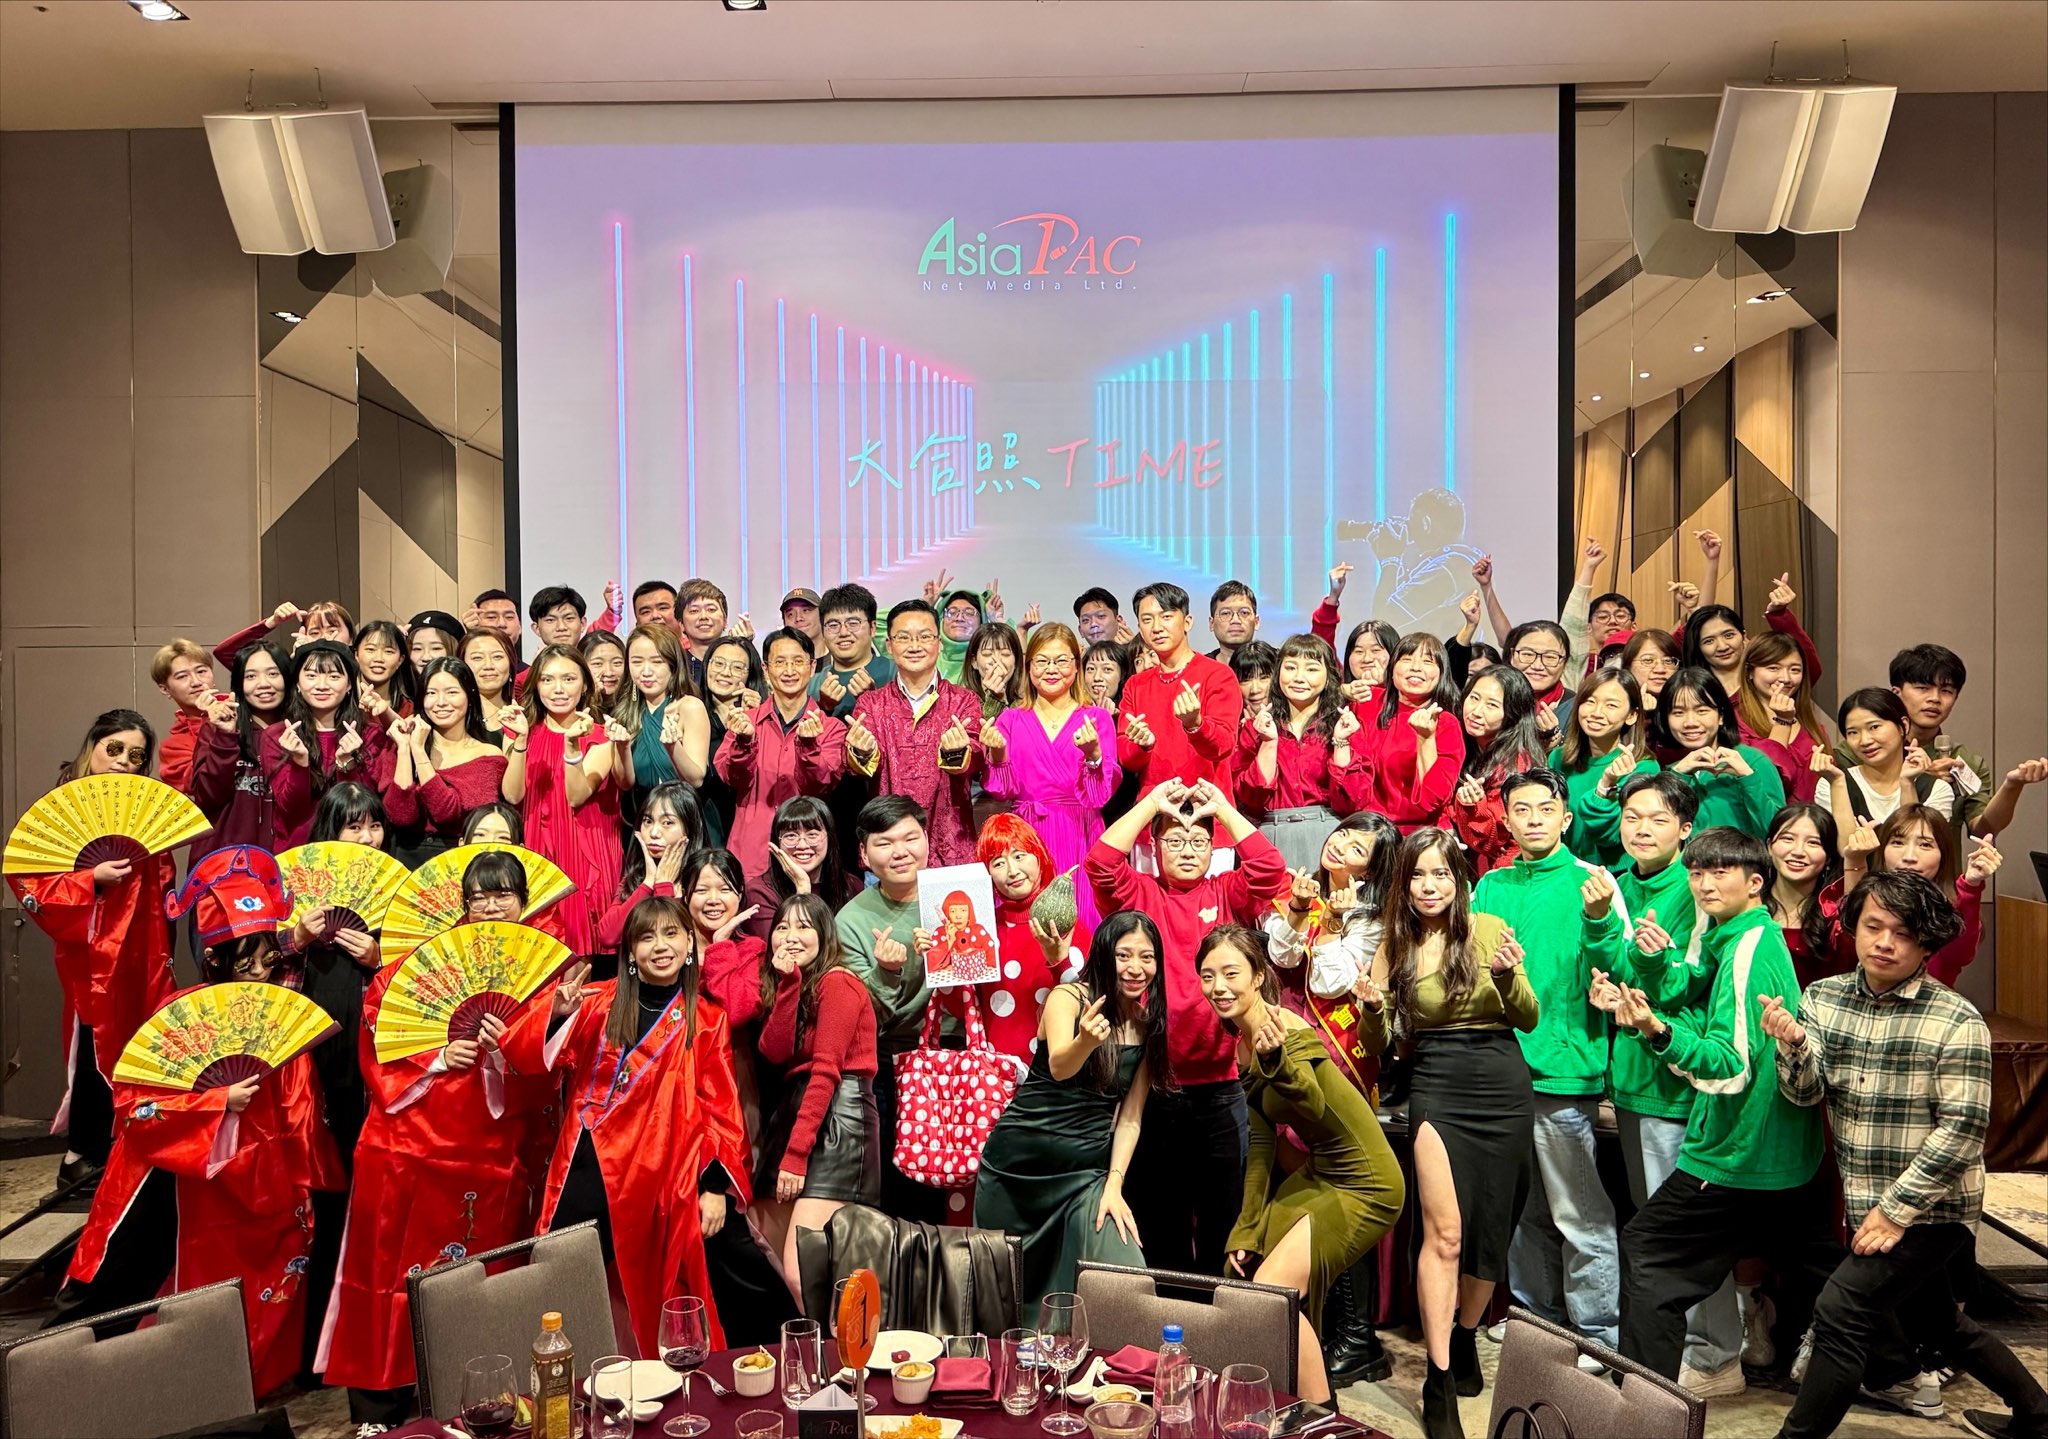 asiapac-annual-dinner-creating-another-year-of-success-02.jpg